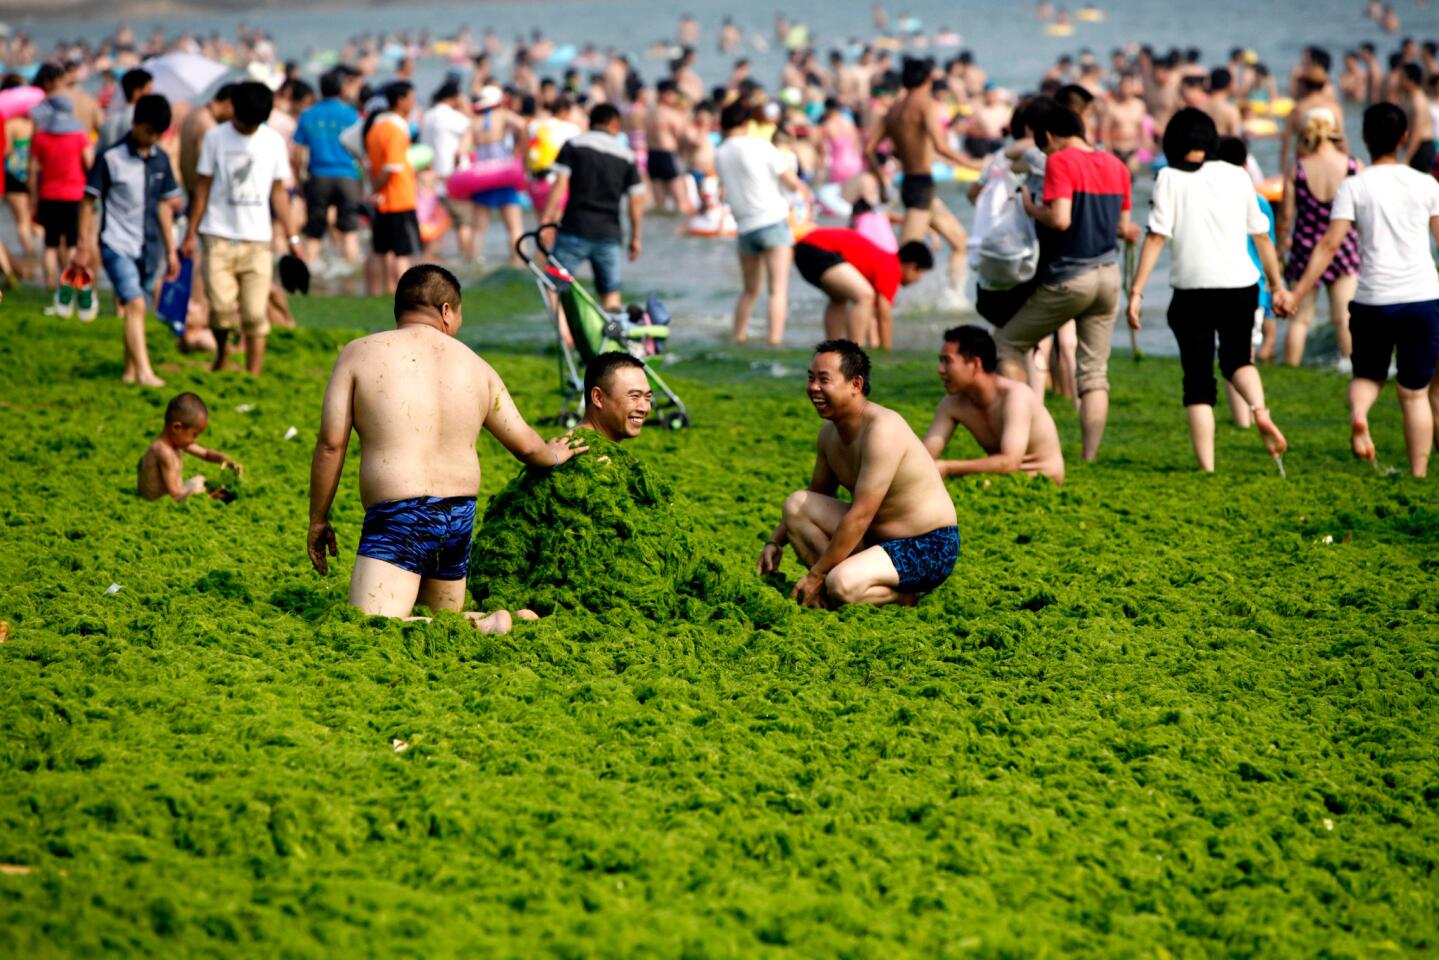 Beachgoers play in the algae that is 16 inches deep in some spots. A woman who answered the Qingdao Tourism Hotline on Friday said the traditional July 1 opening of the city's designated beach swimming zone had been delayed due to the algae bloom.